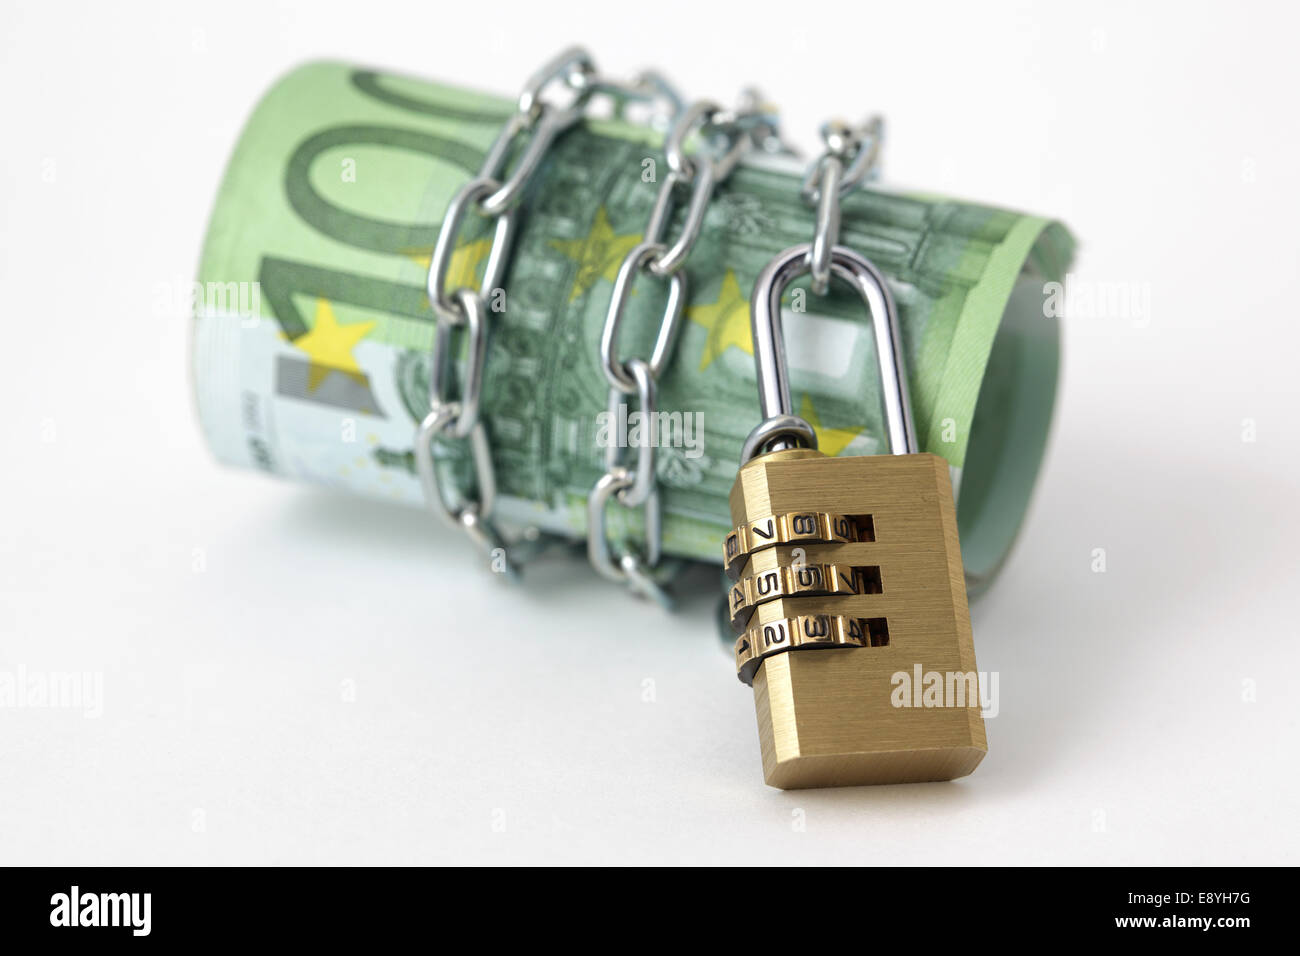 Euro notes with lock and chain Stock Photo